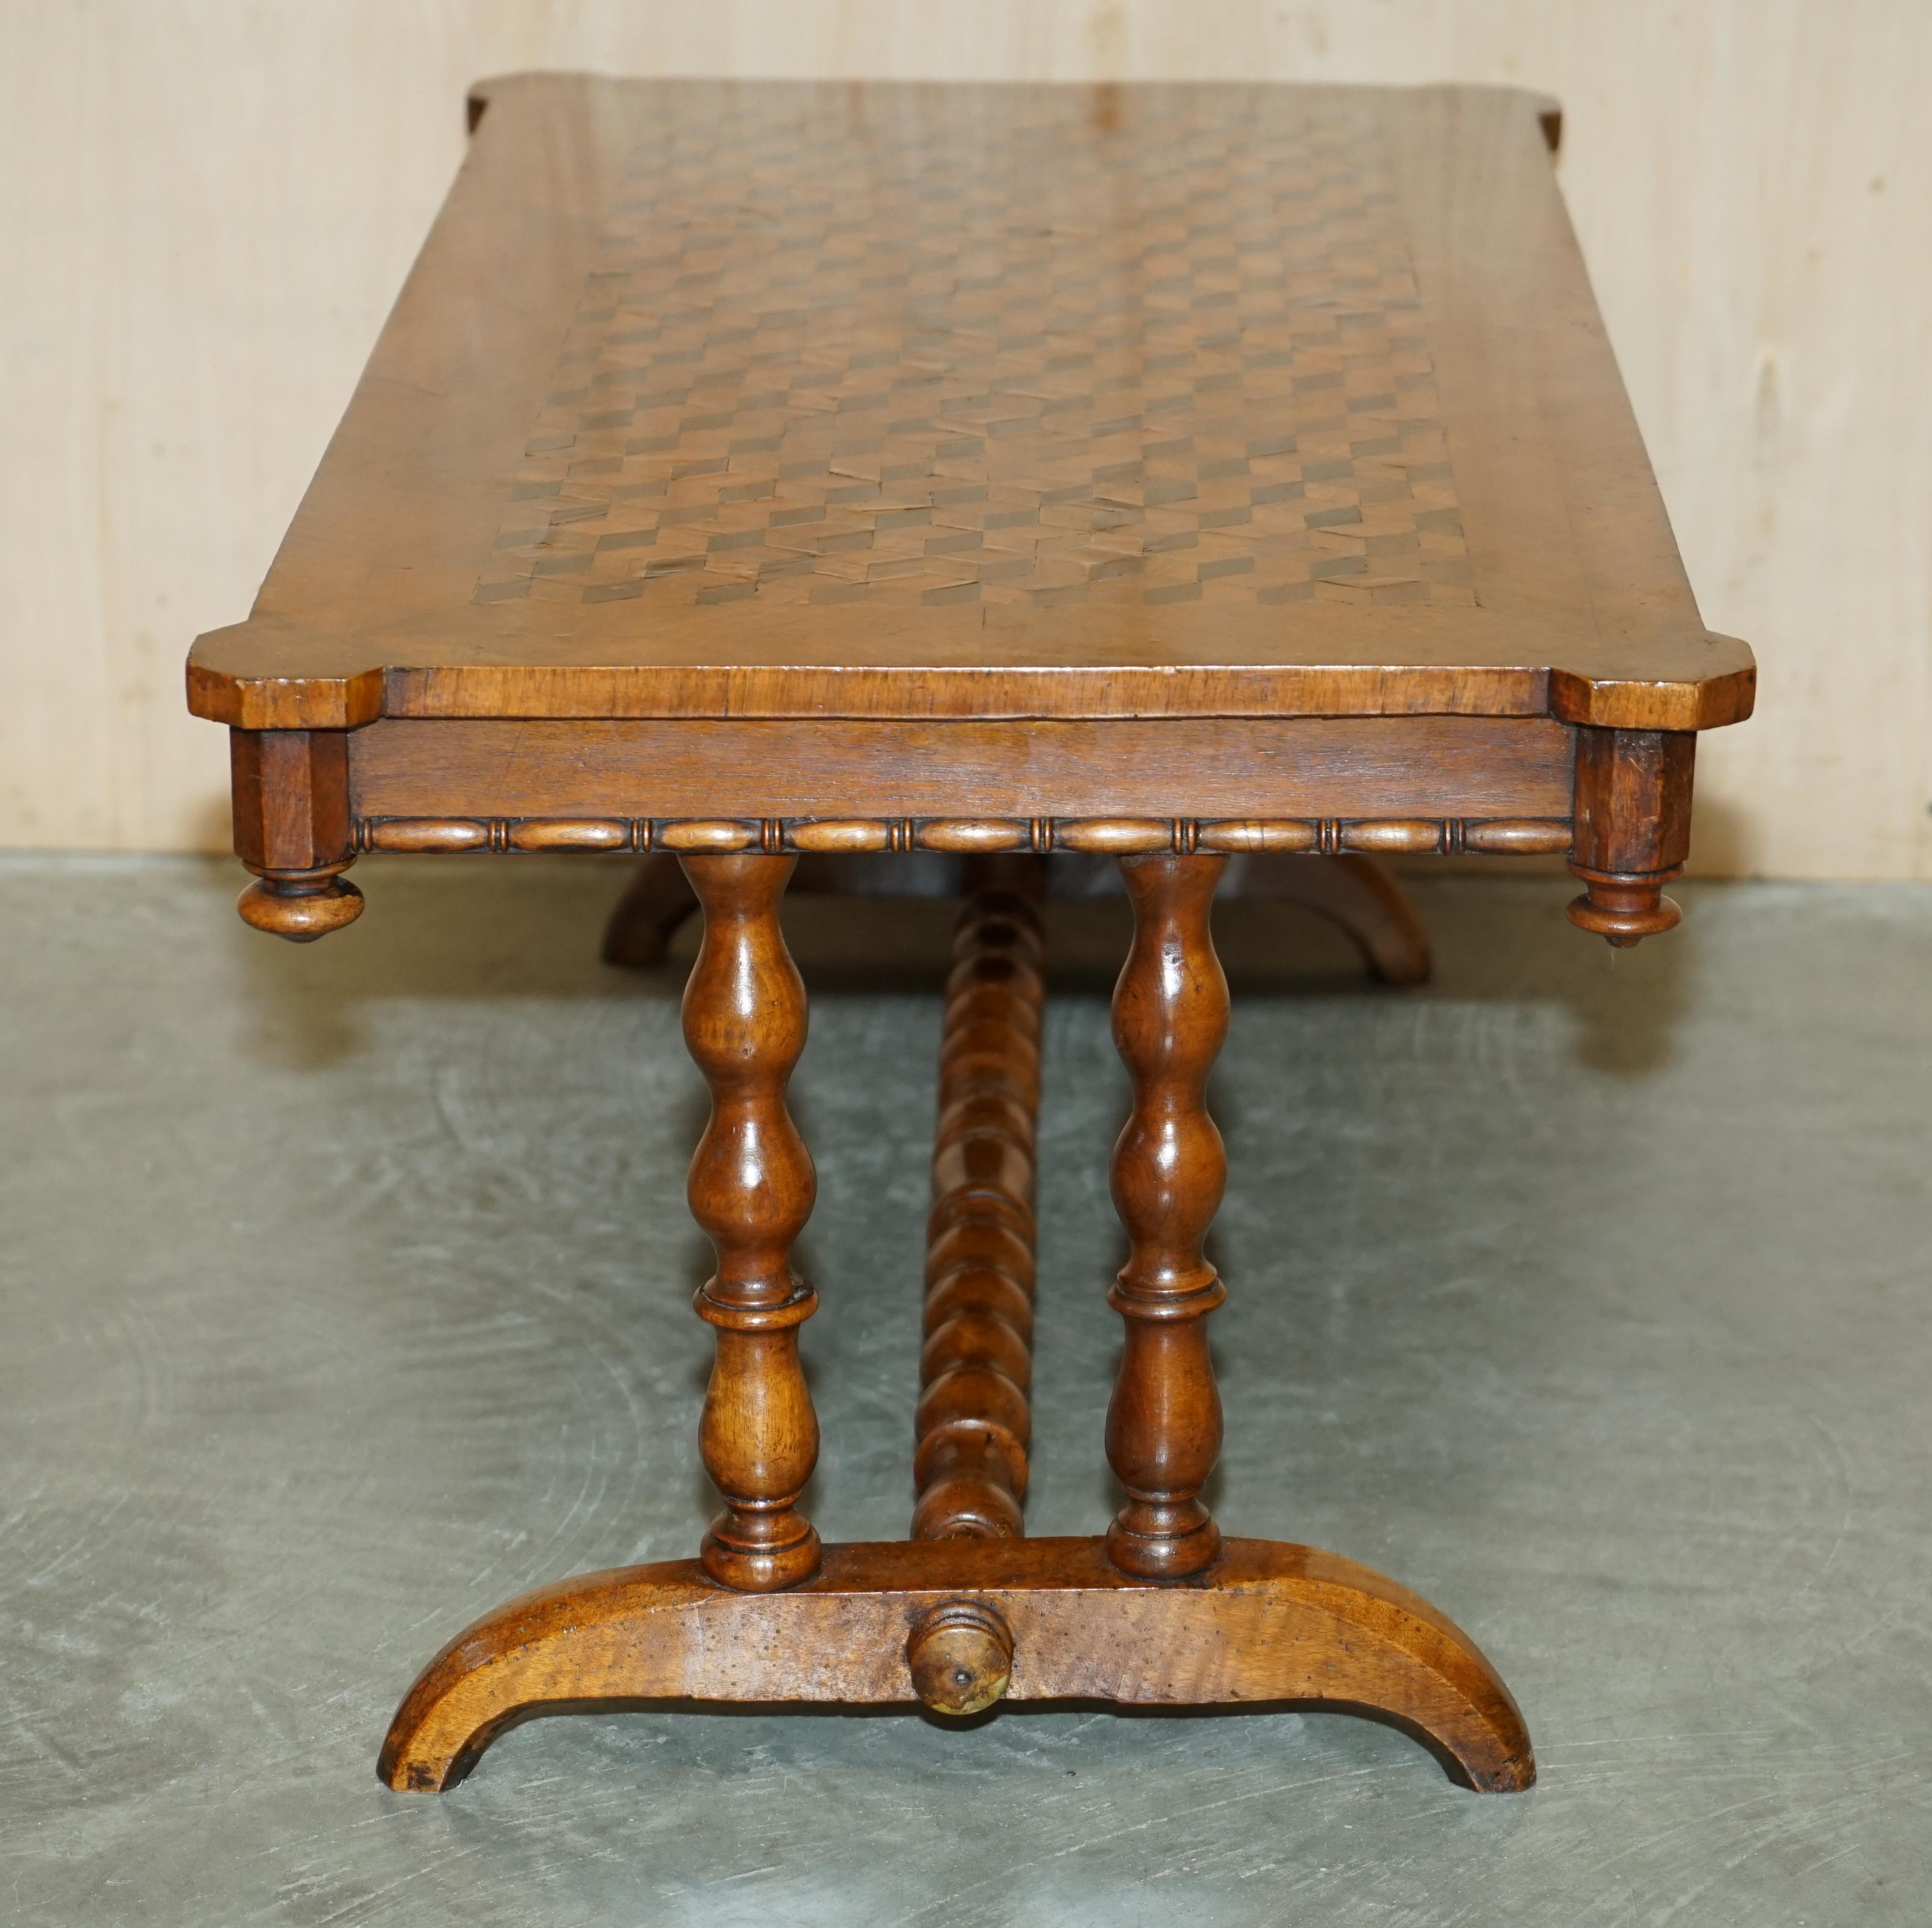 SUBLIME ANTiQUE 19TH CENTURY SPECIMEN GEOMETRIC SAMPLE WOOD INLAID COFFEE TABLE For Sale 9